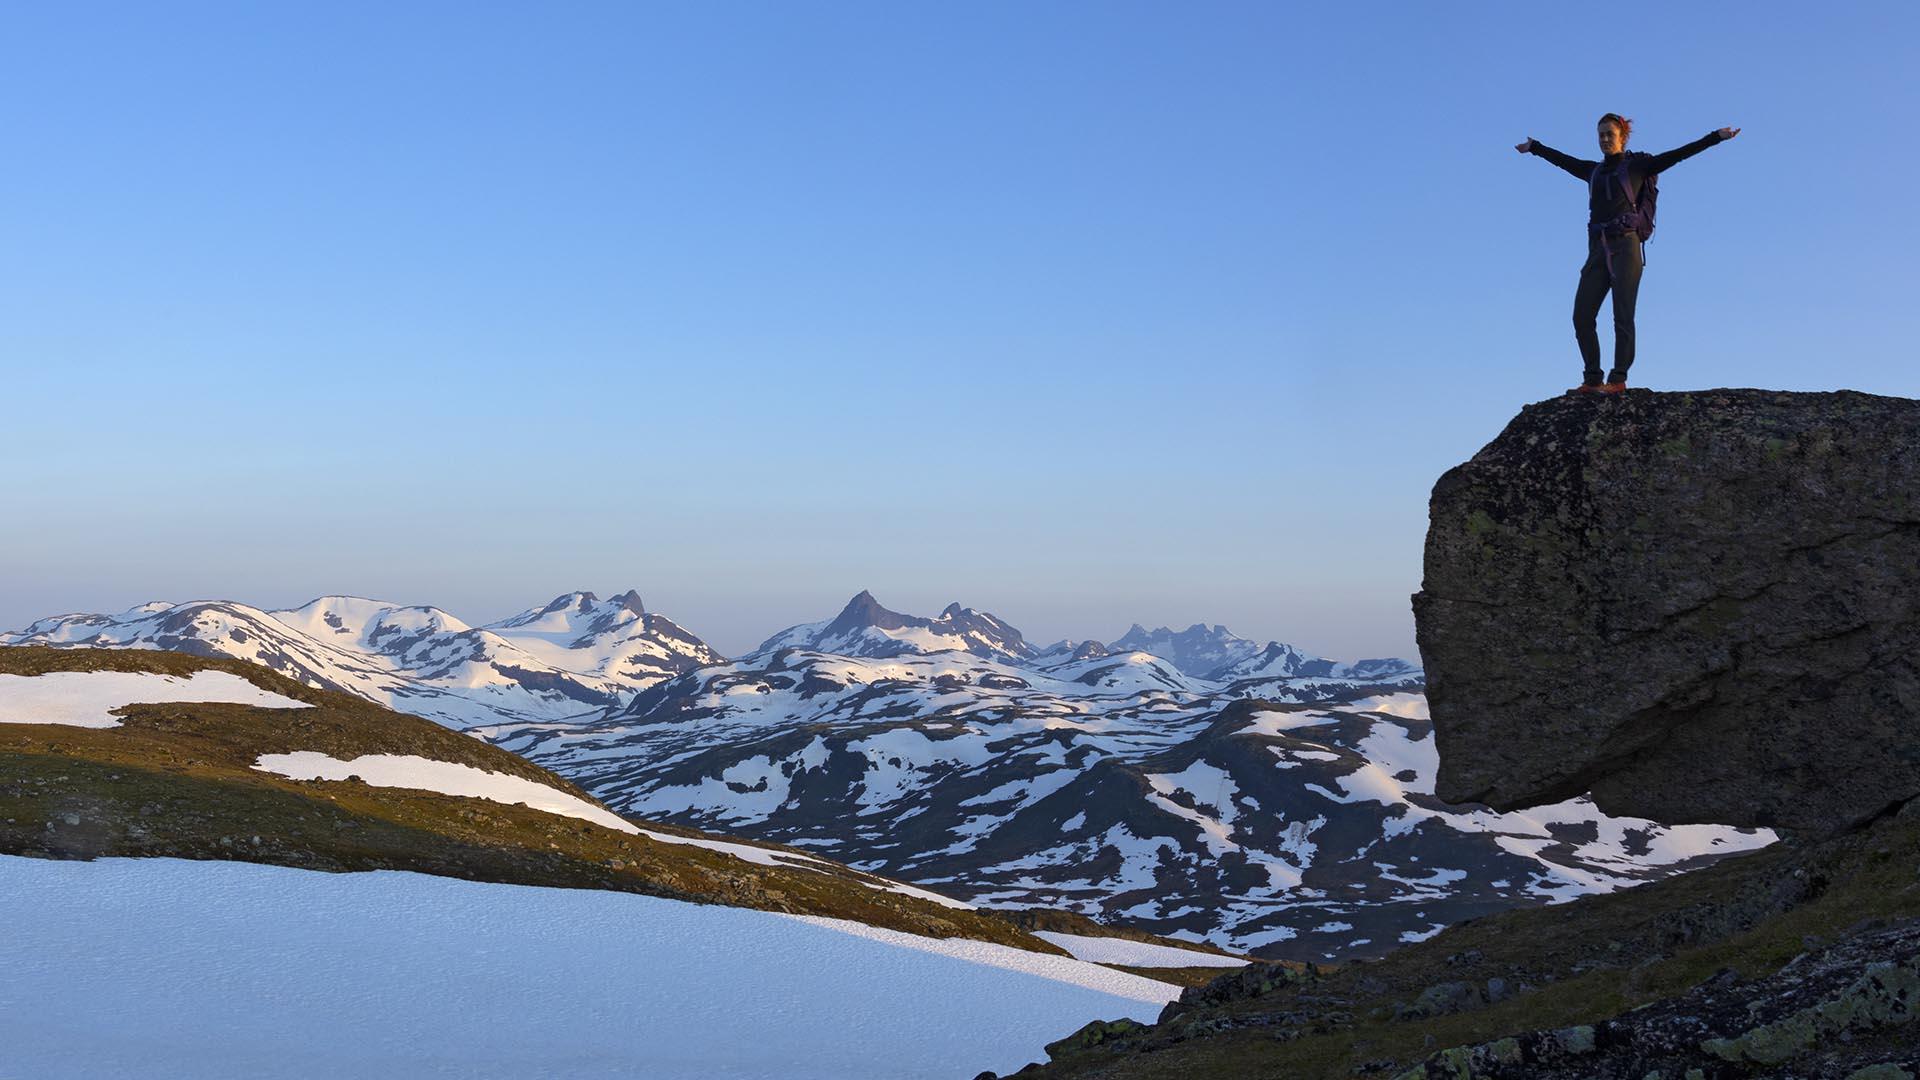 Clear sky, hiker standing on top a rock at the right while enjoying wild mountains with snow spots in the background.